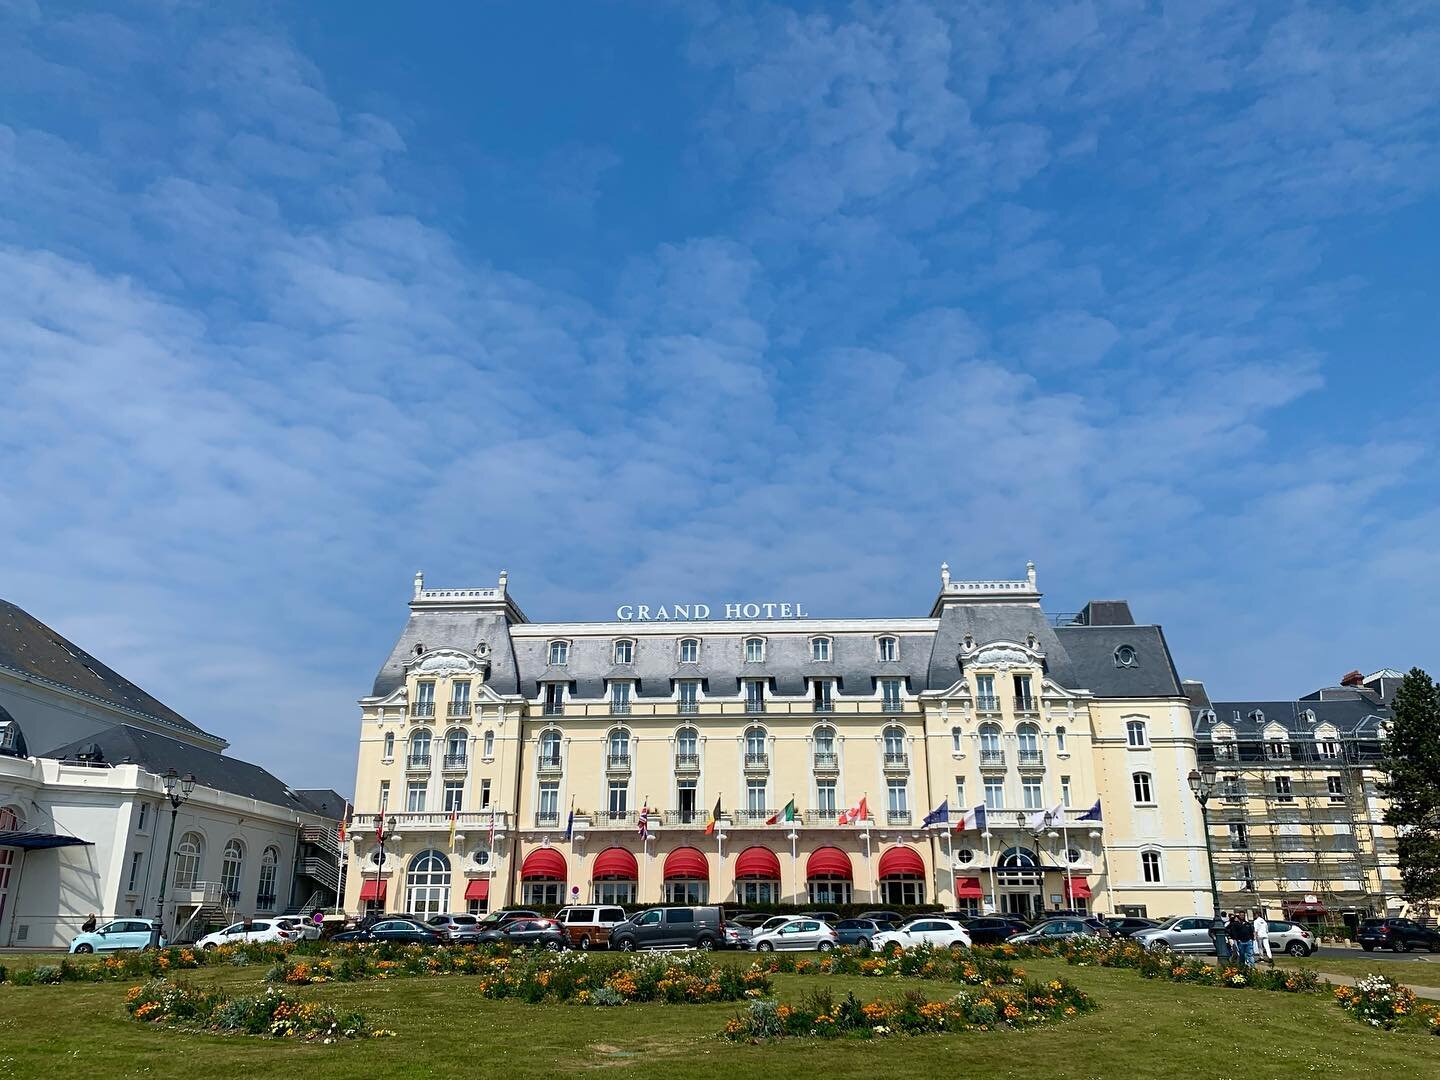 Le Grand H&ocirc;tel Cabourg is located right on the beach and just steps away from the main town of Cabourg #grandhotelcabourg #accor #jidenba #cabourg